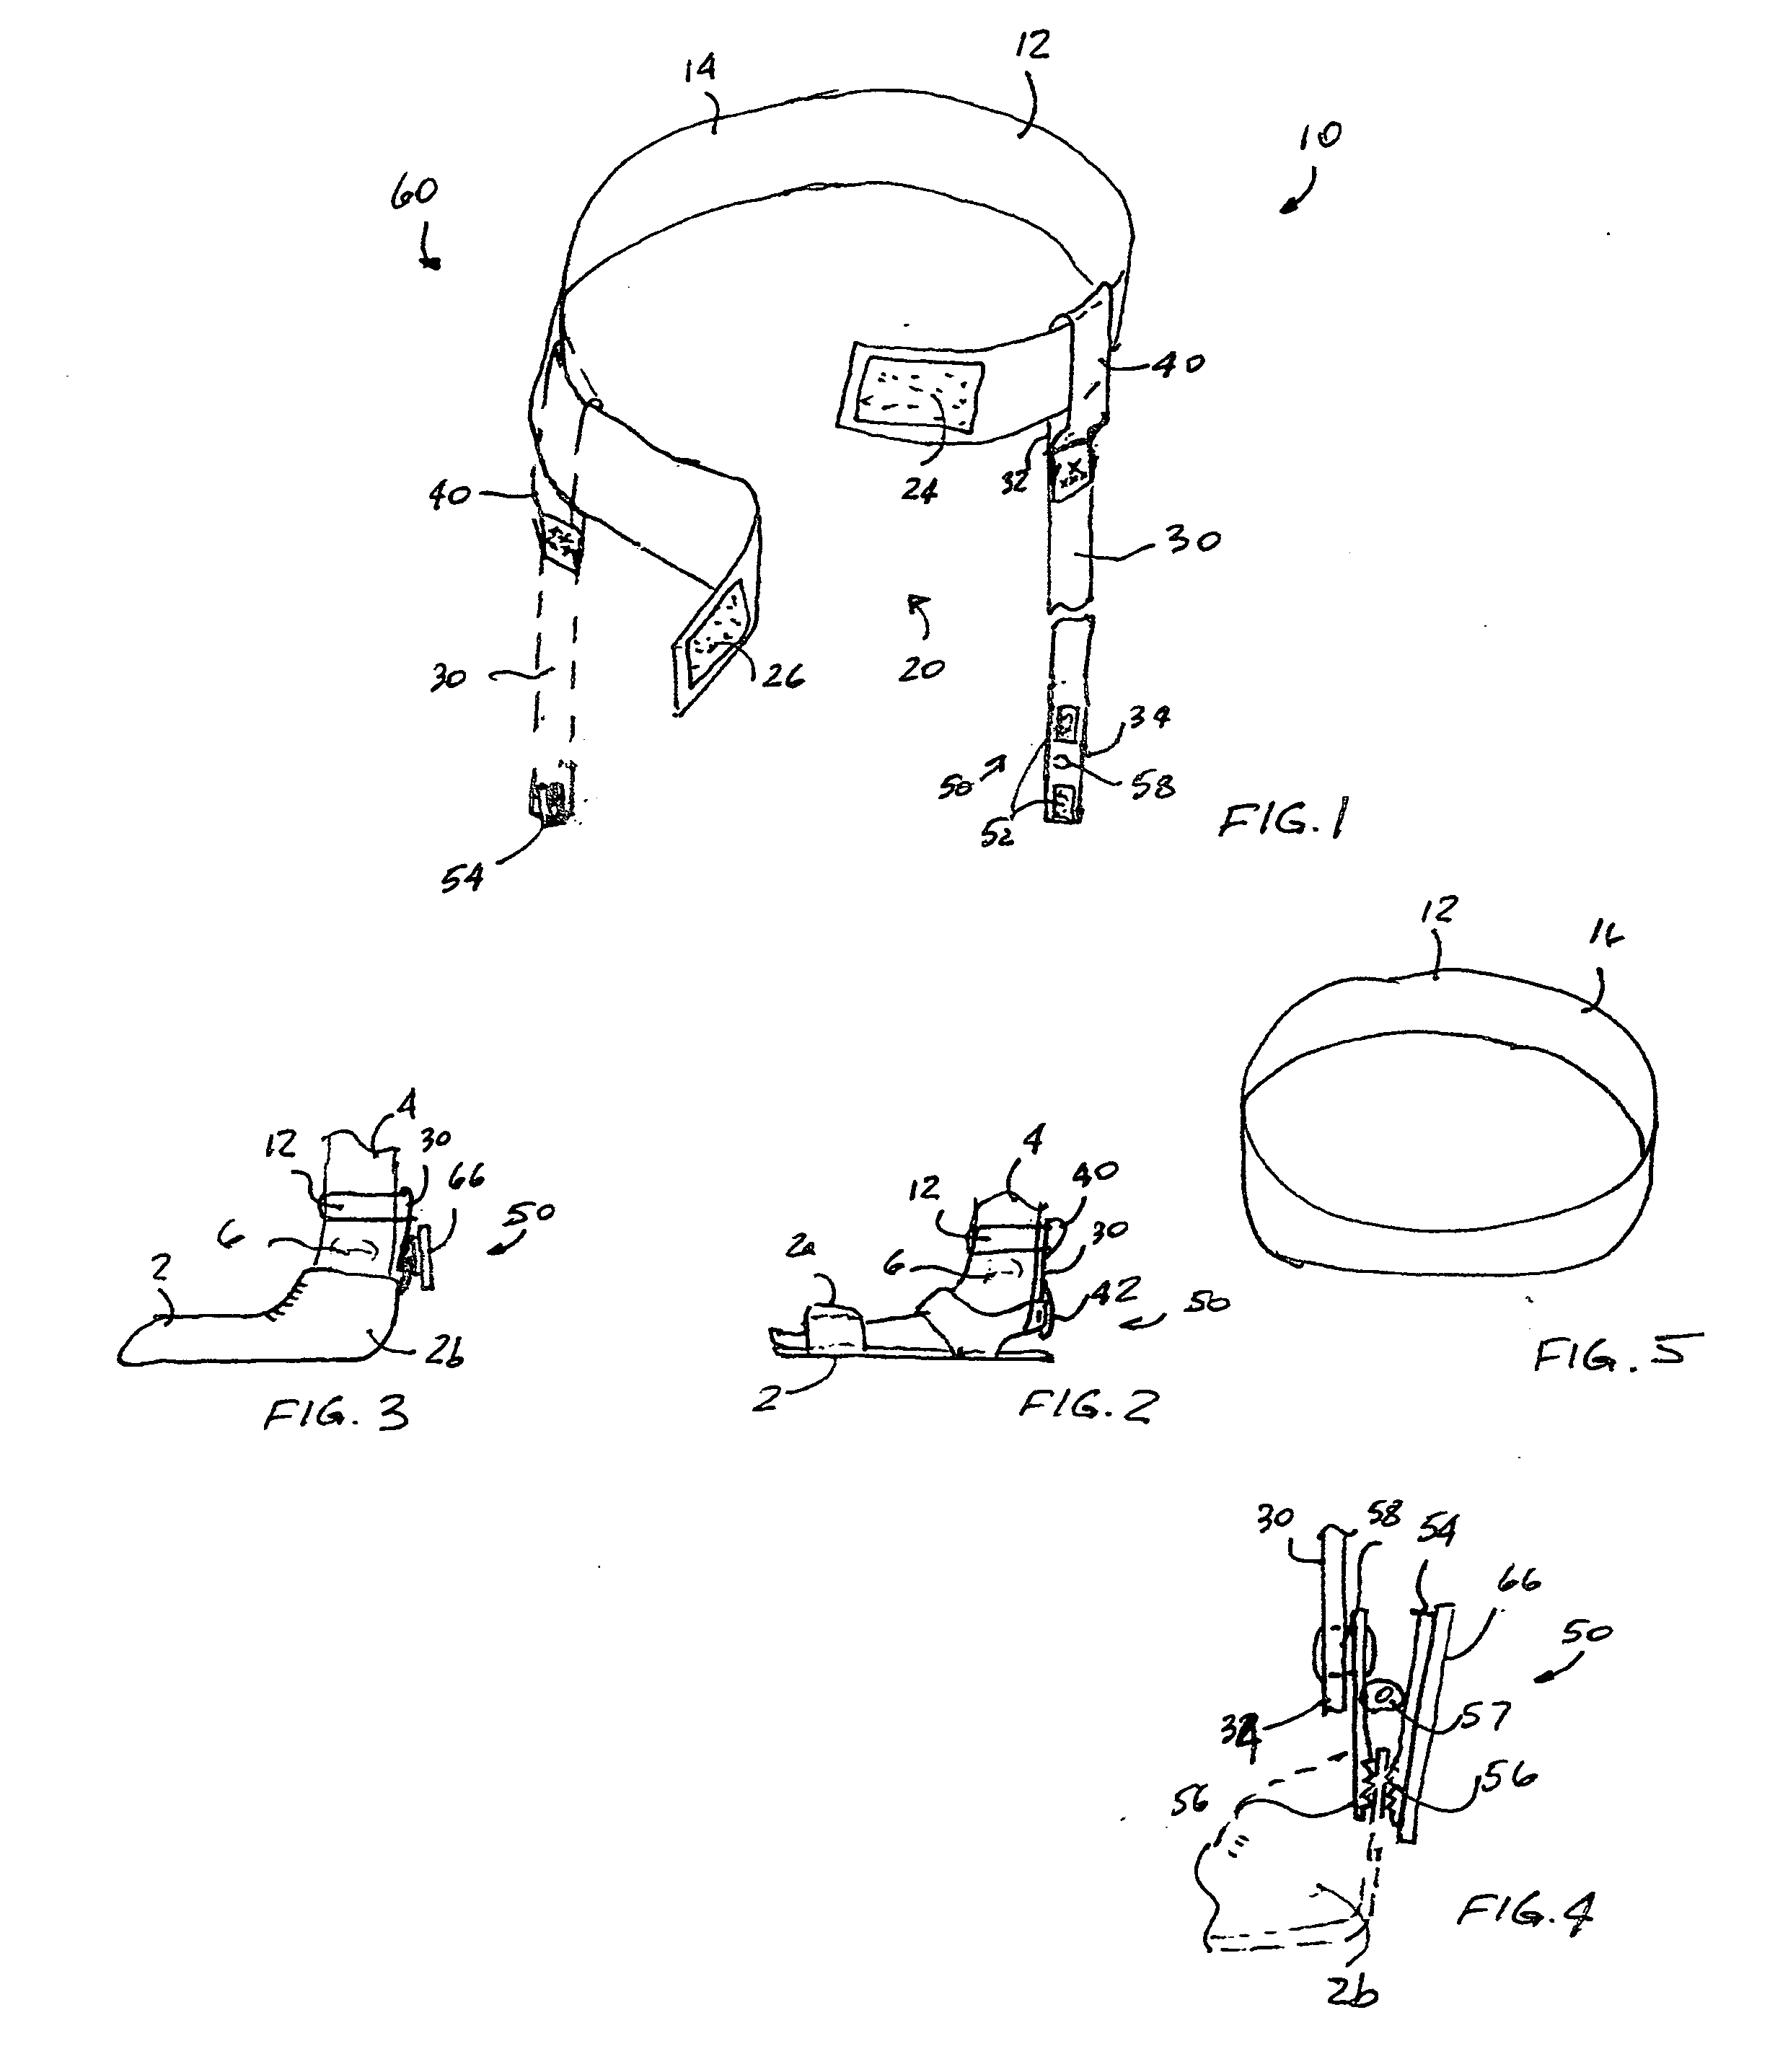 Device for preventing loss of a foot covering